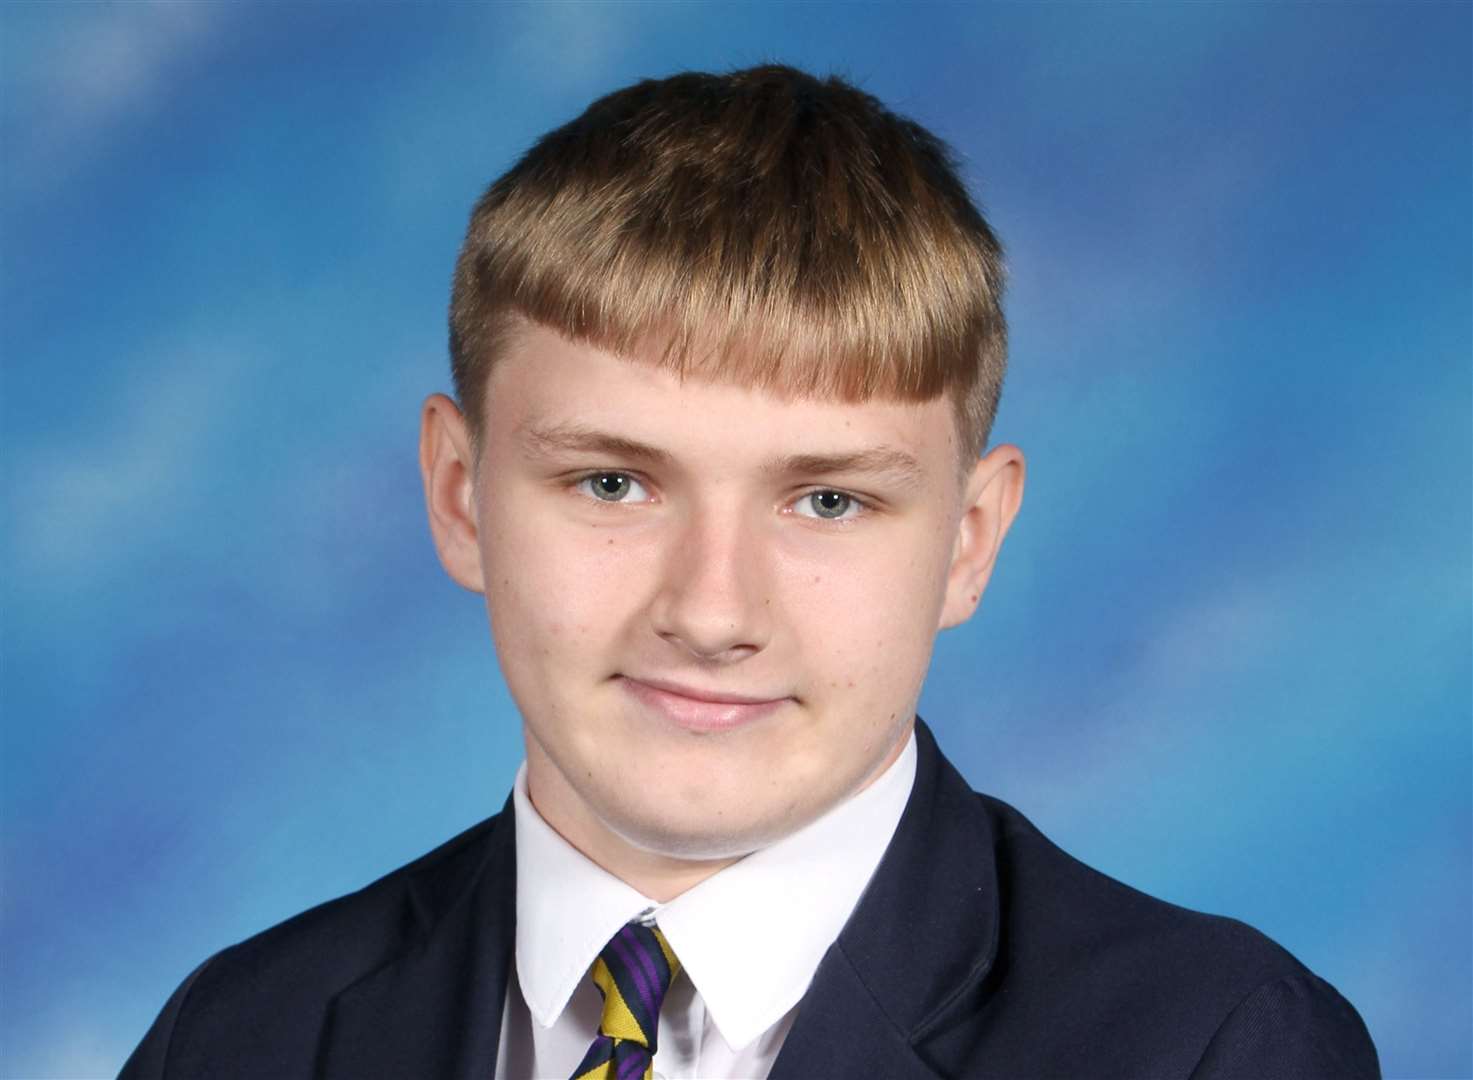 More than 250 people turned out for the funeral of 15-year-old Towers School pupil Owen Kinghorn